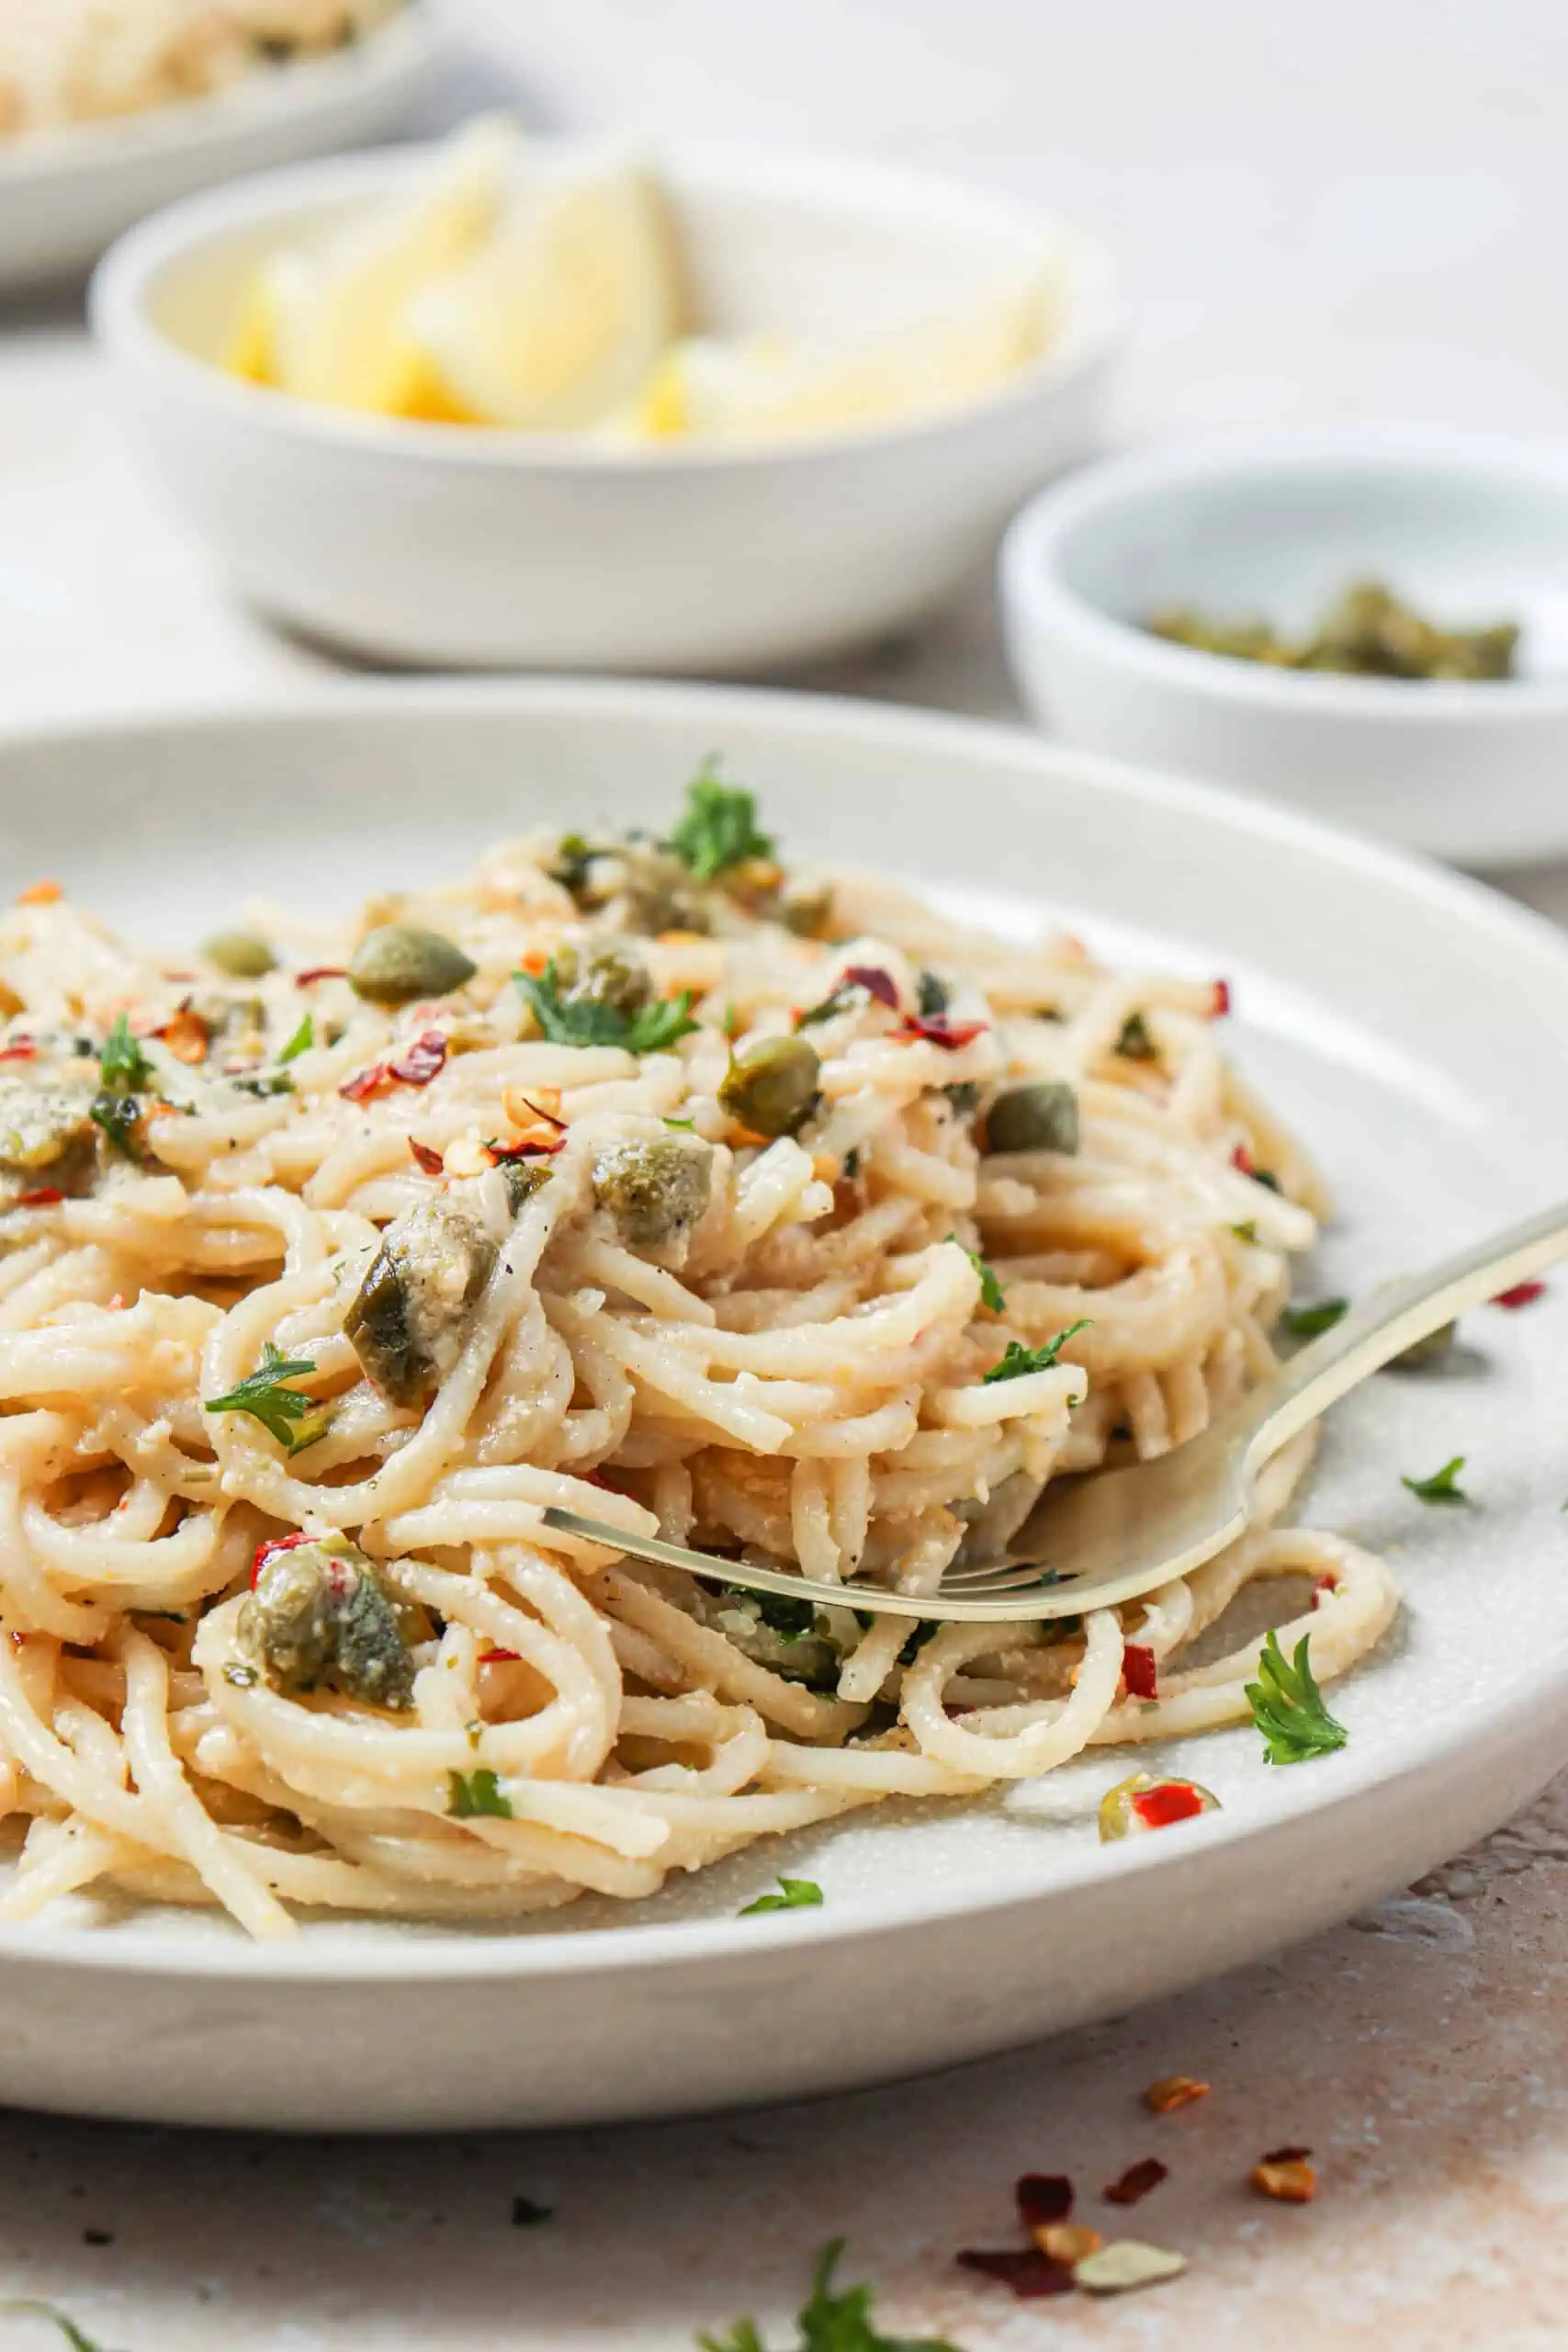 Light and Simple Pasta with Lemon Caper Sauce